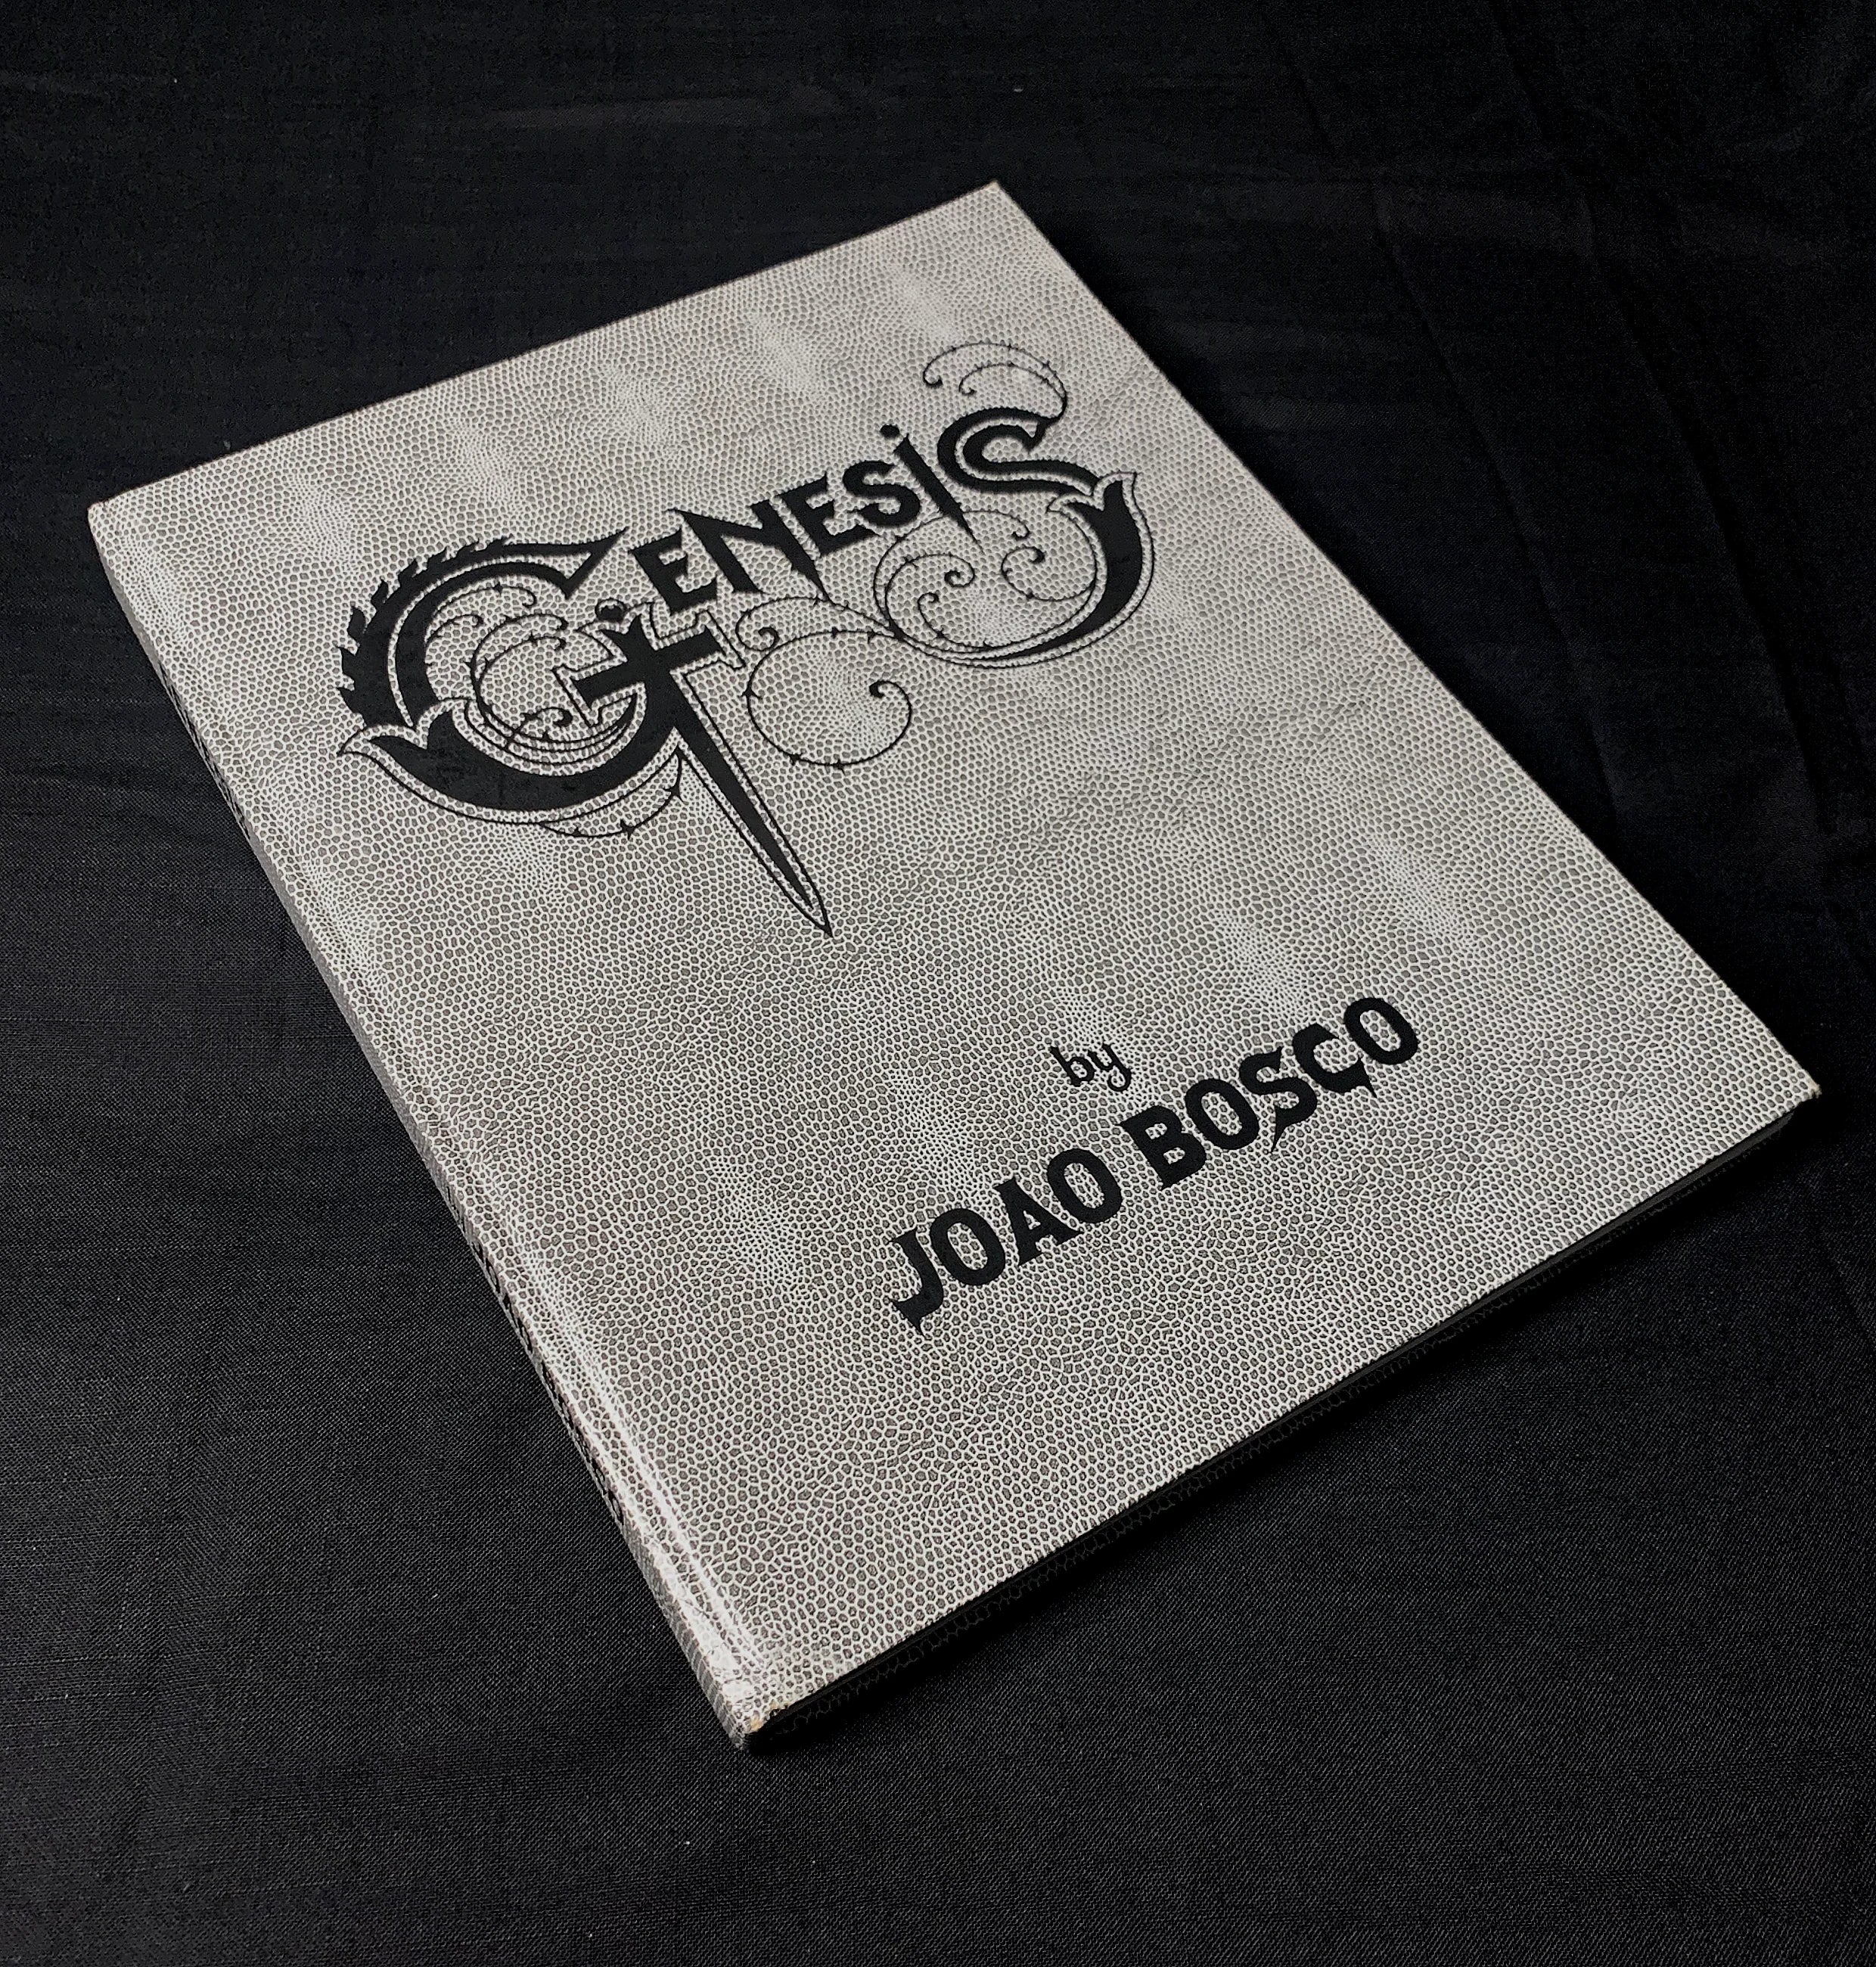 Genesis artwork book by Joao Bosco front view